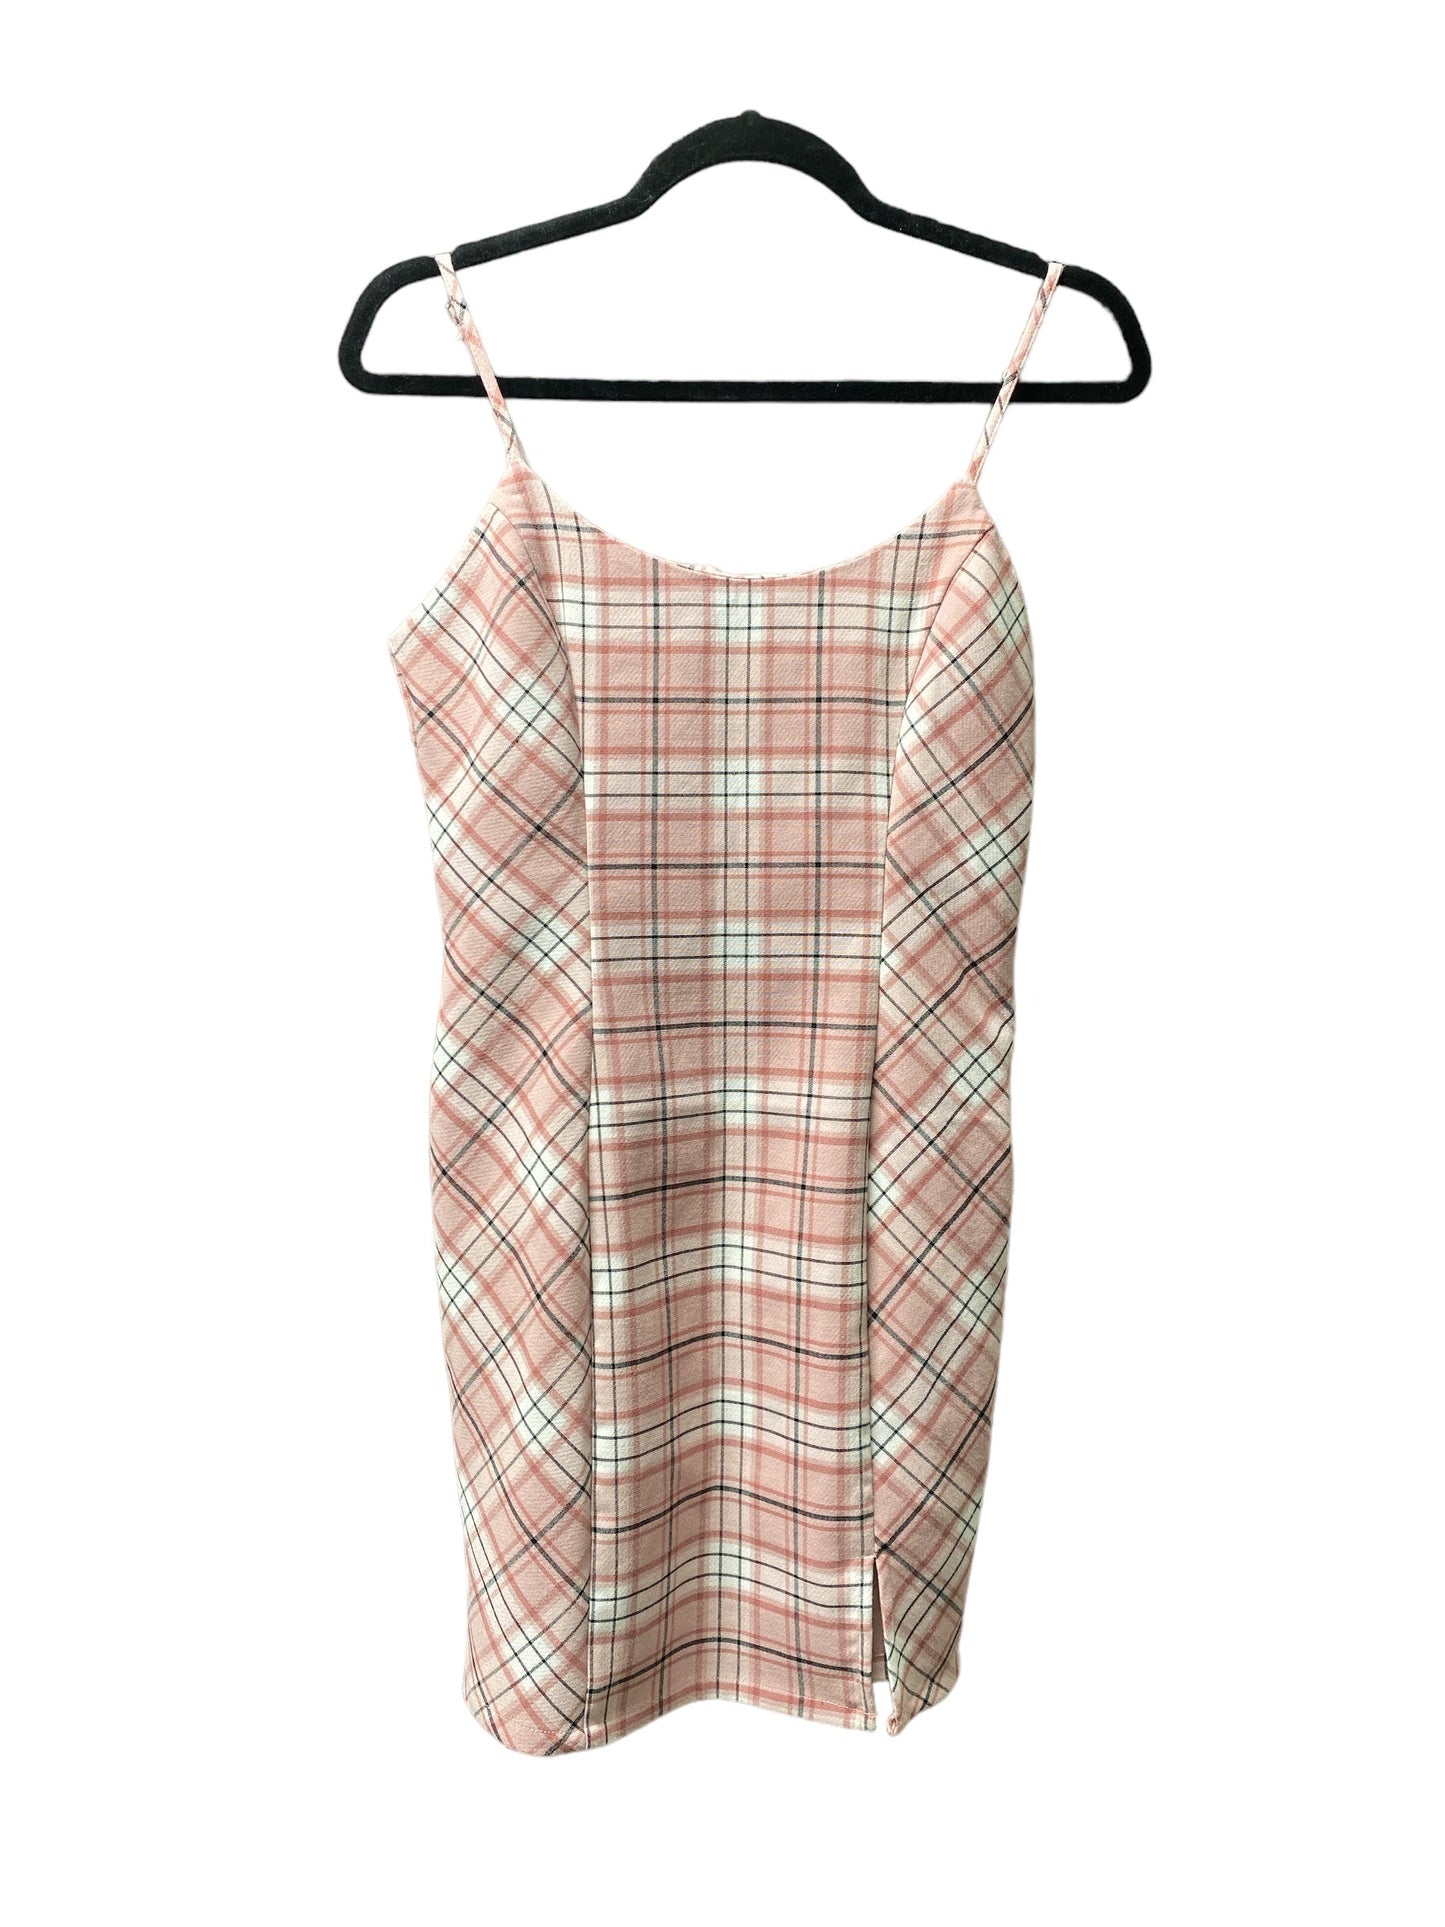 Plaid Pattern Dress Casual Short Forever 21, Size S